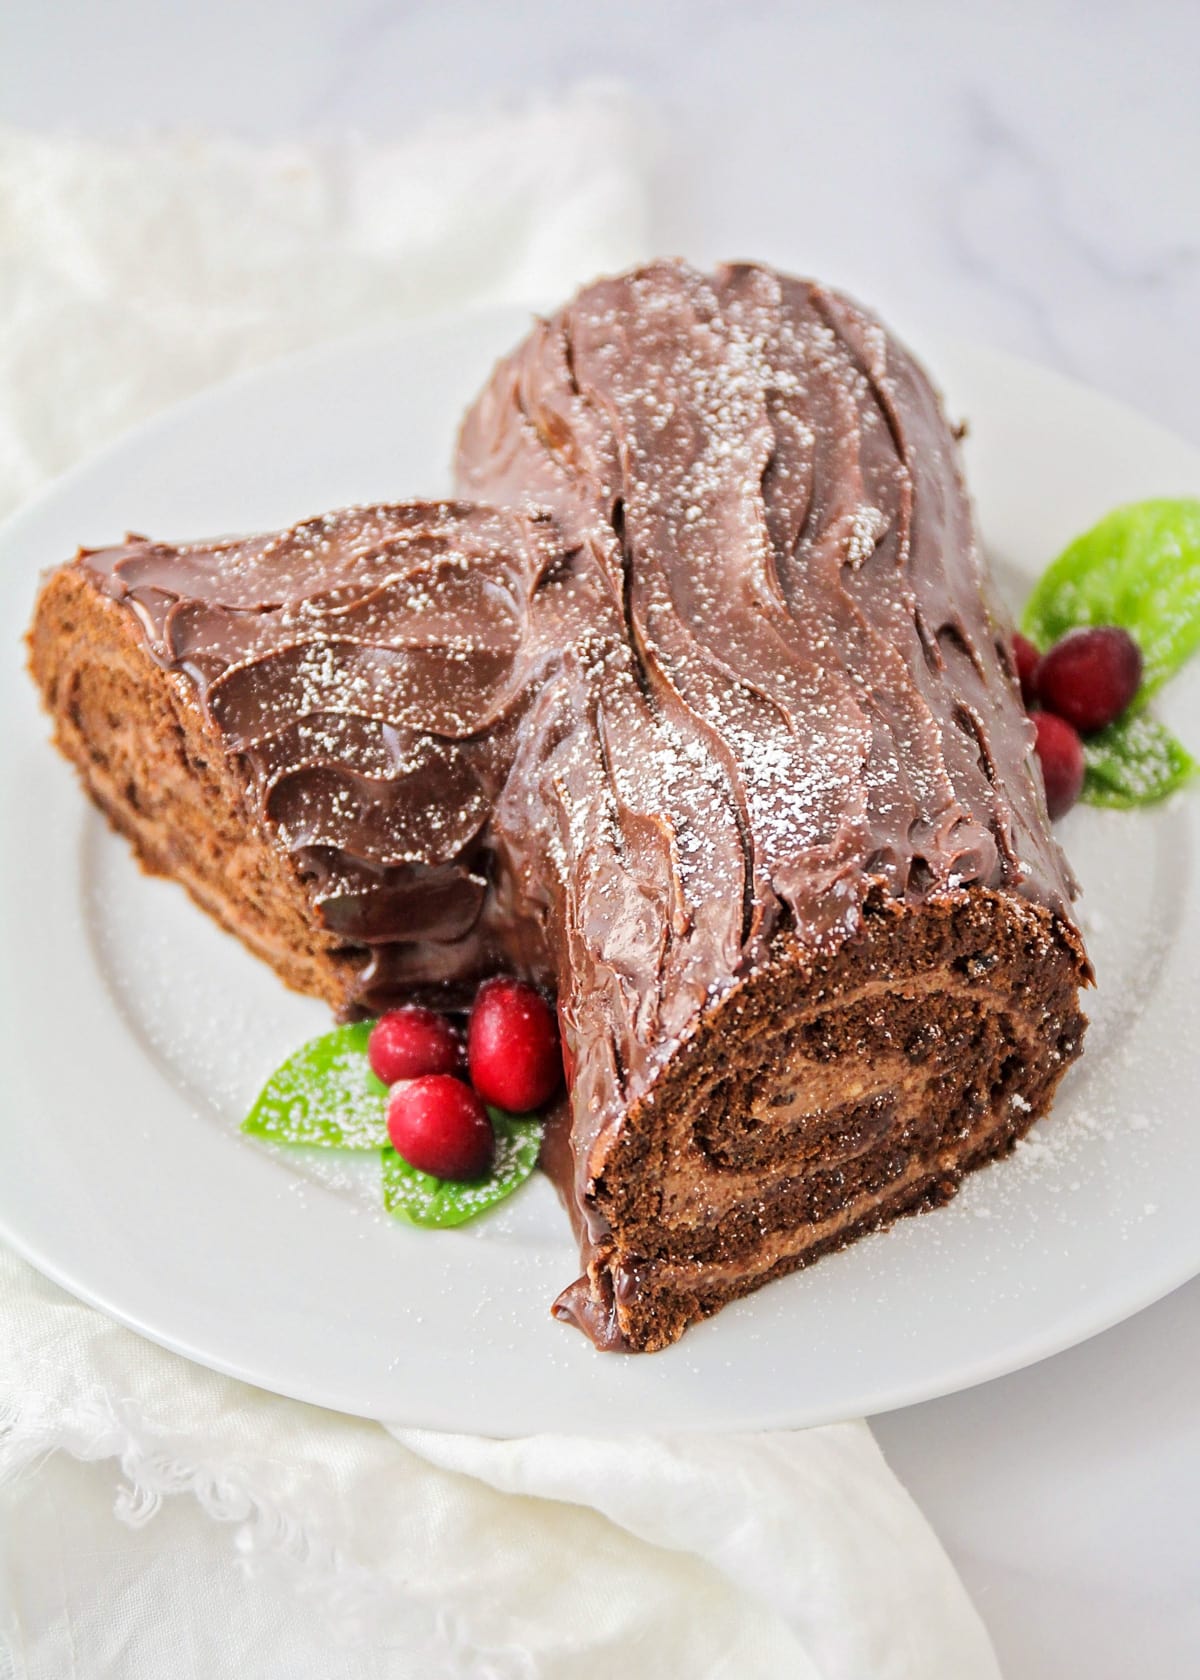 A decorated yule log cake served on a white plate.